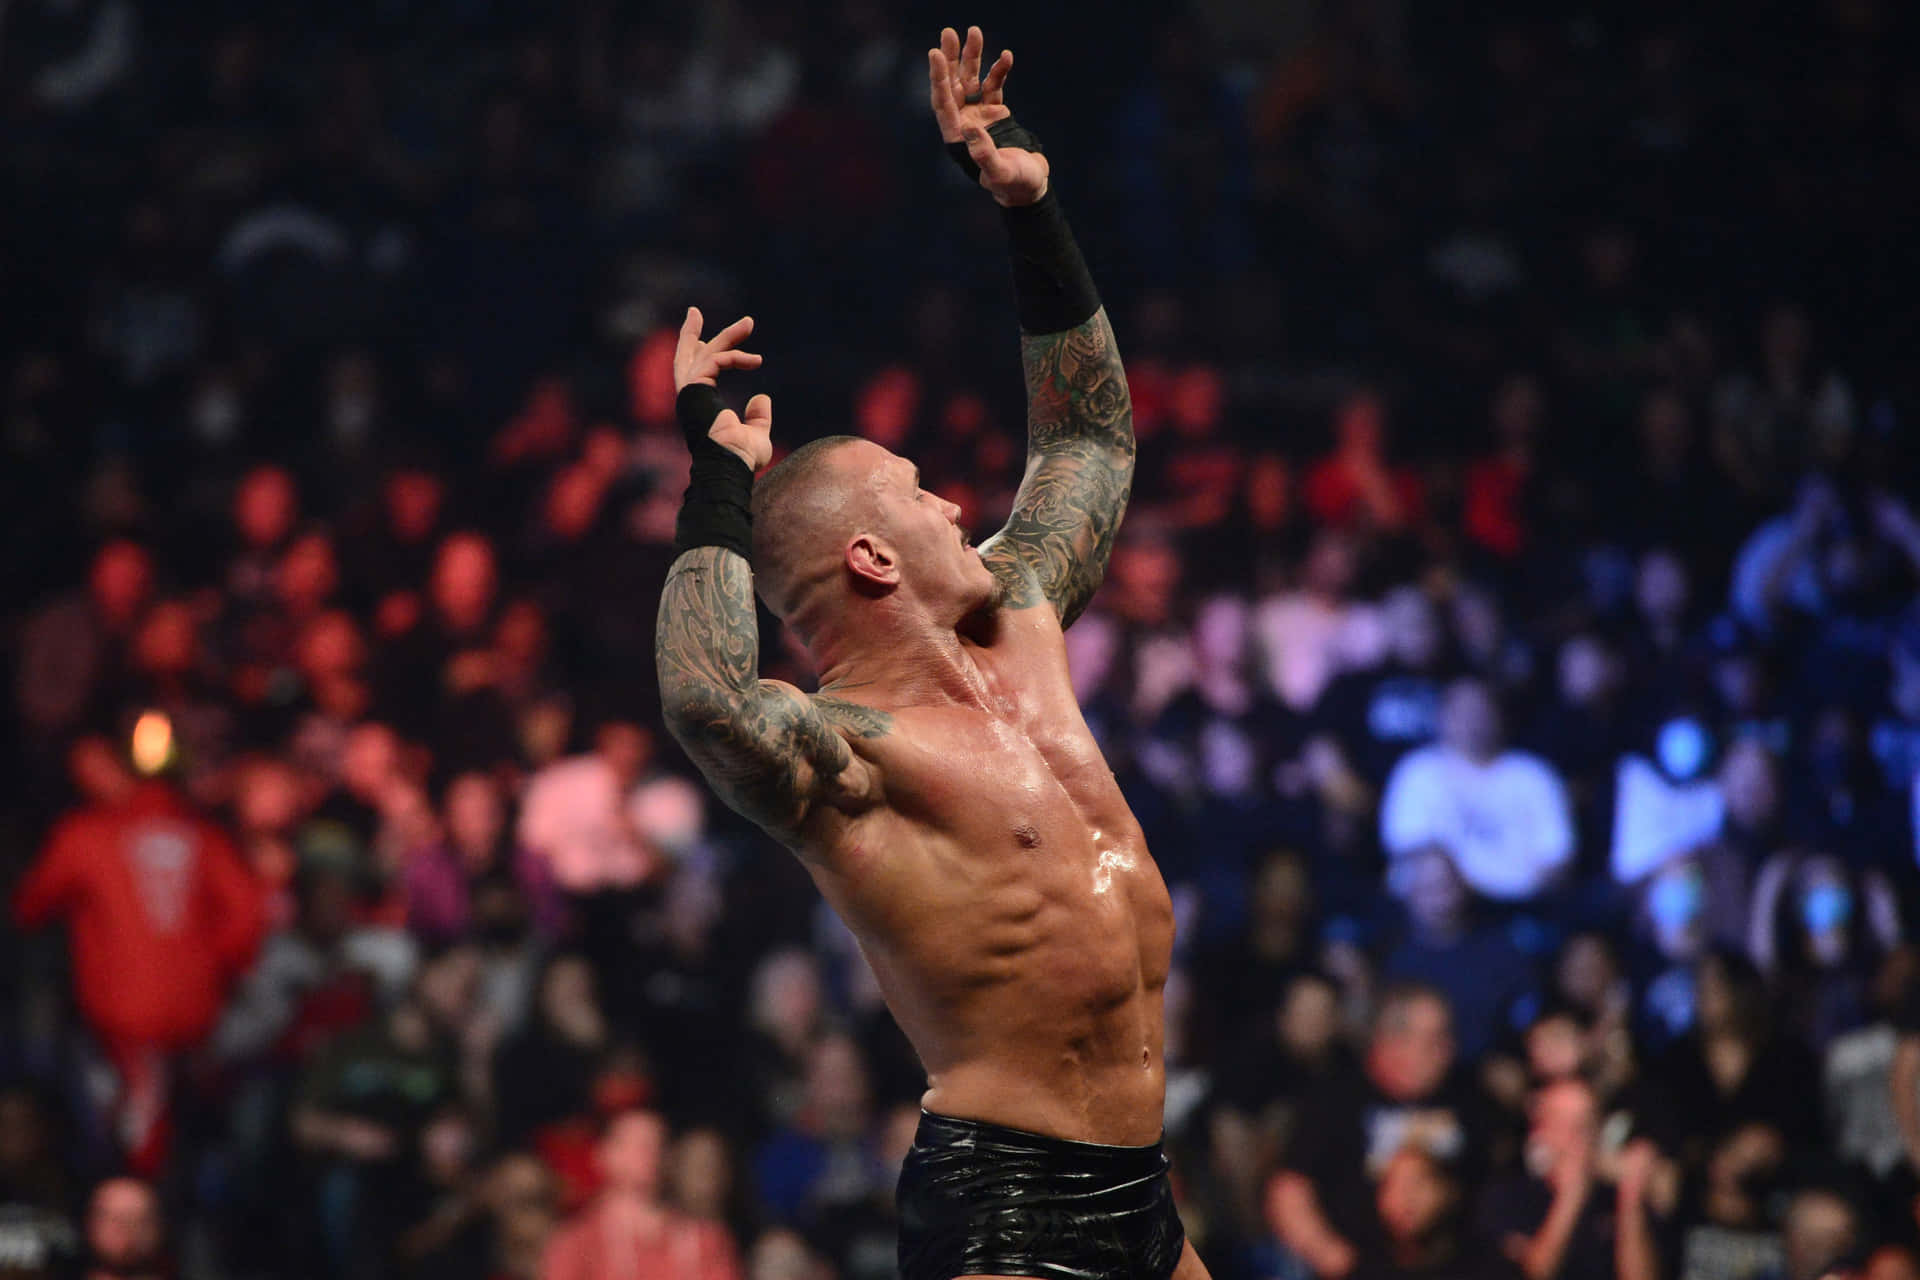 A Wrestler With Tattoos Is Holding His Arms Up In The Air Background